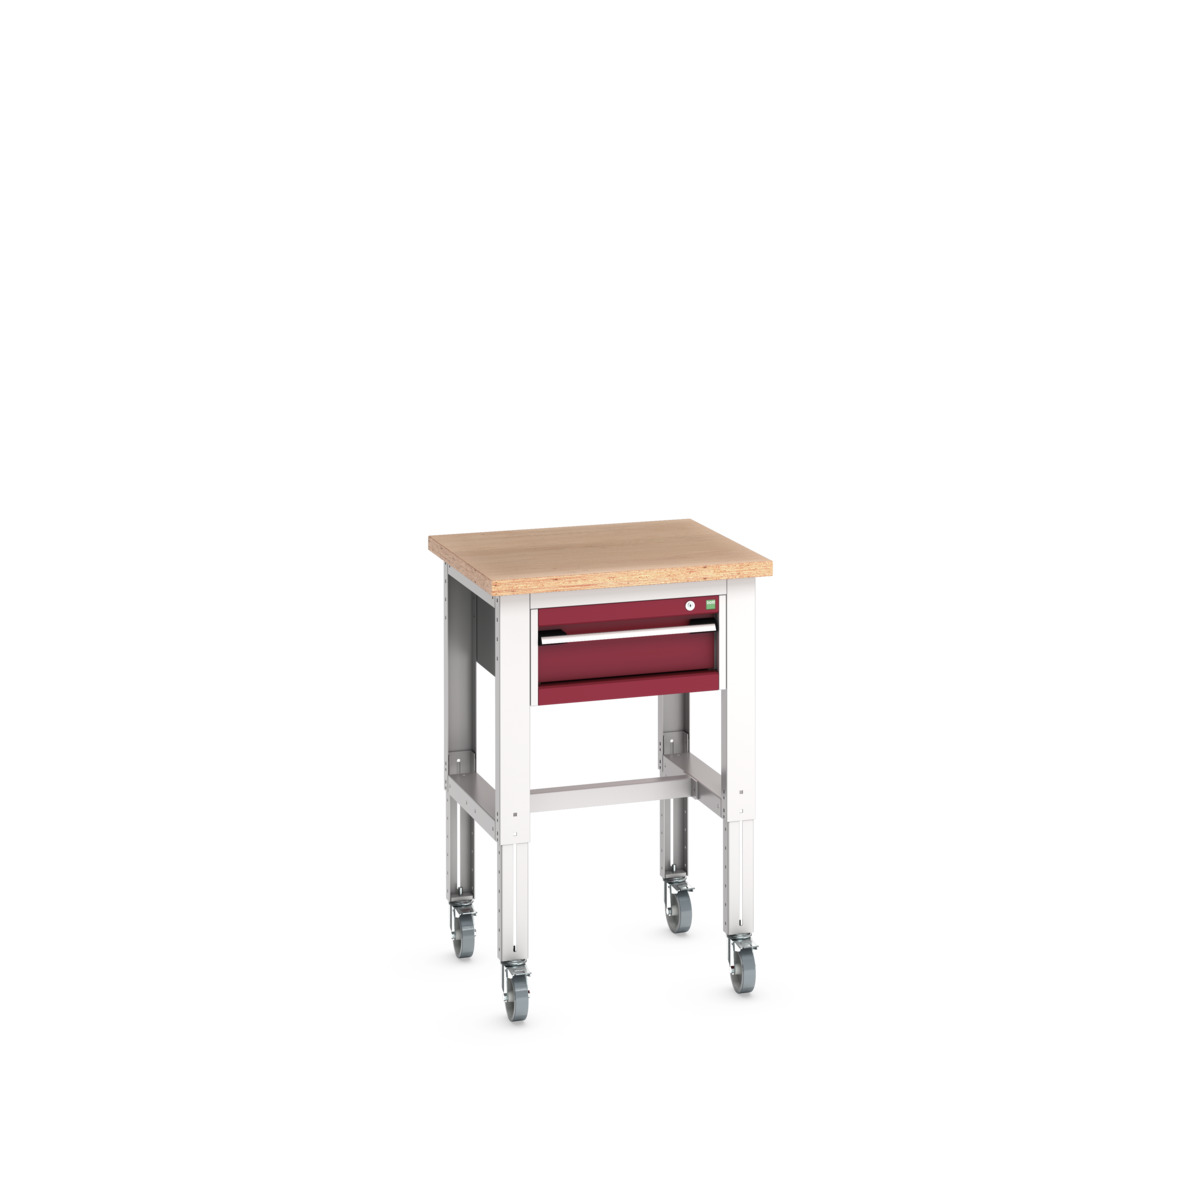 41003271.24V - cubio mobile bench adj height (mpx)